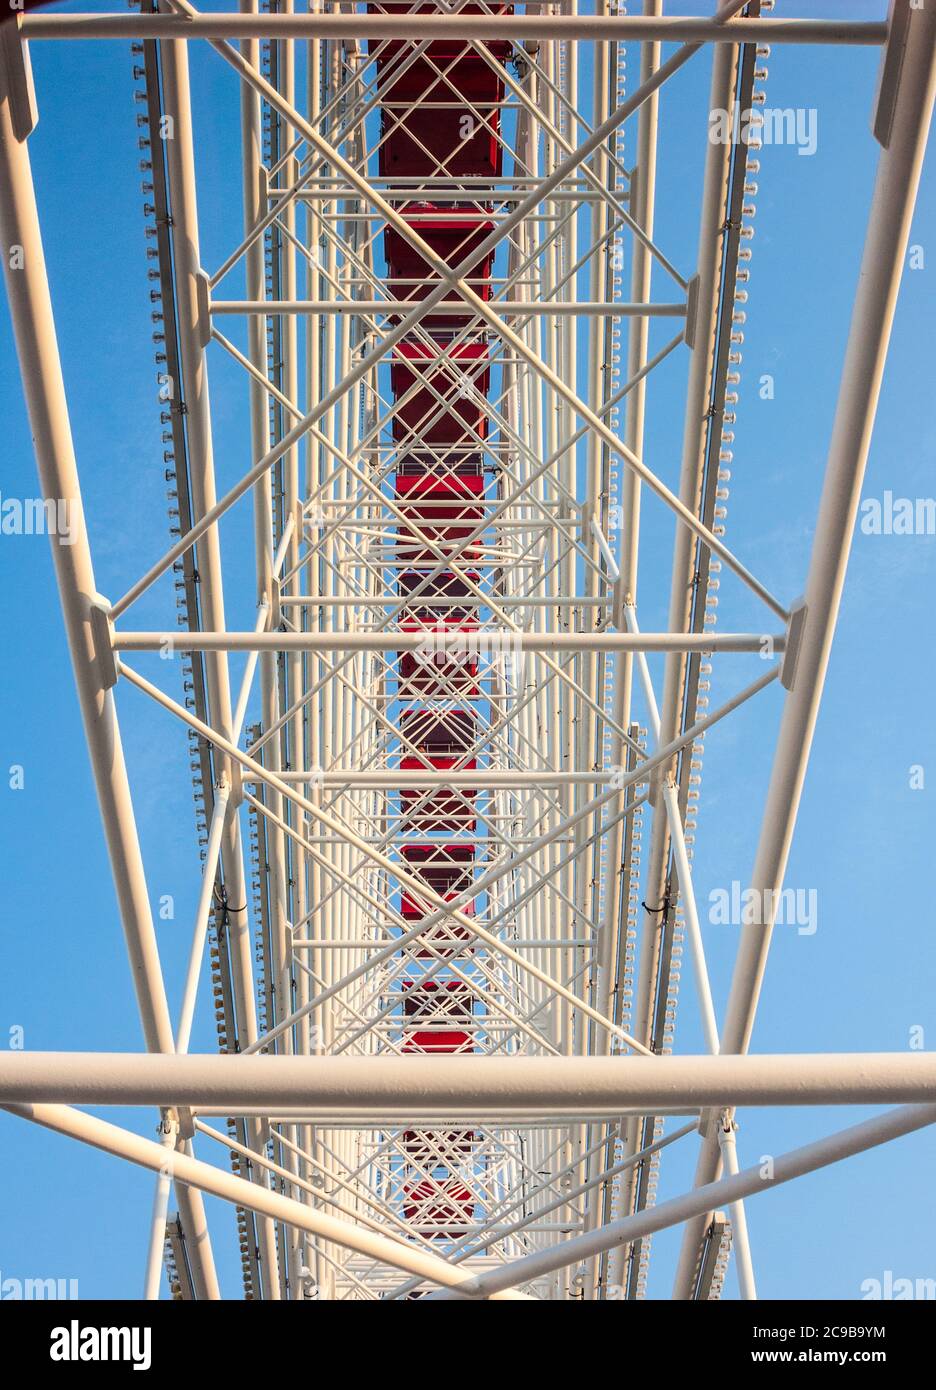 Chicago.  Ferris Wheel at Navy Pier, from one gondola to another. Stock Photo